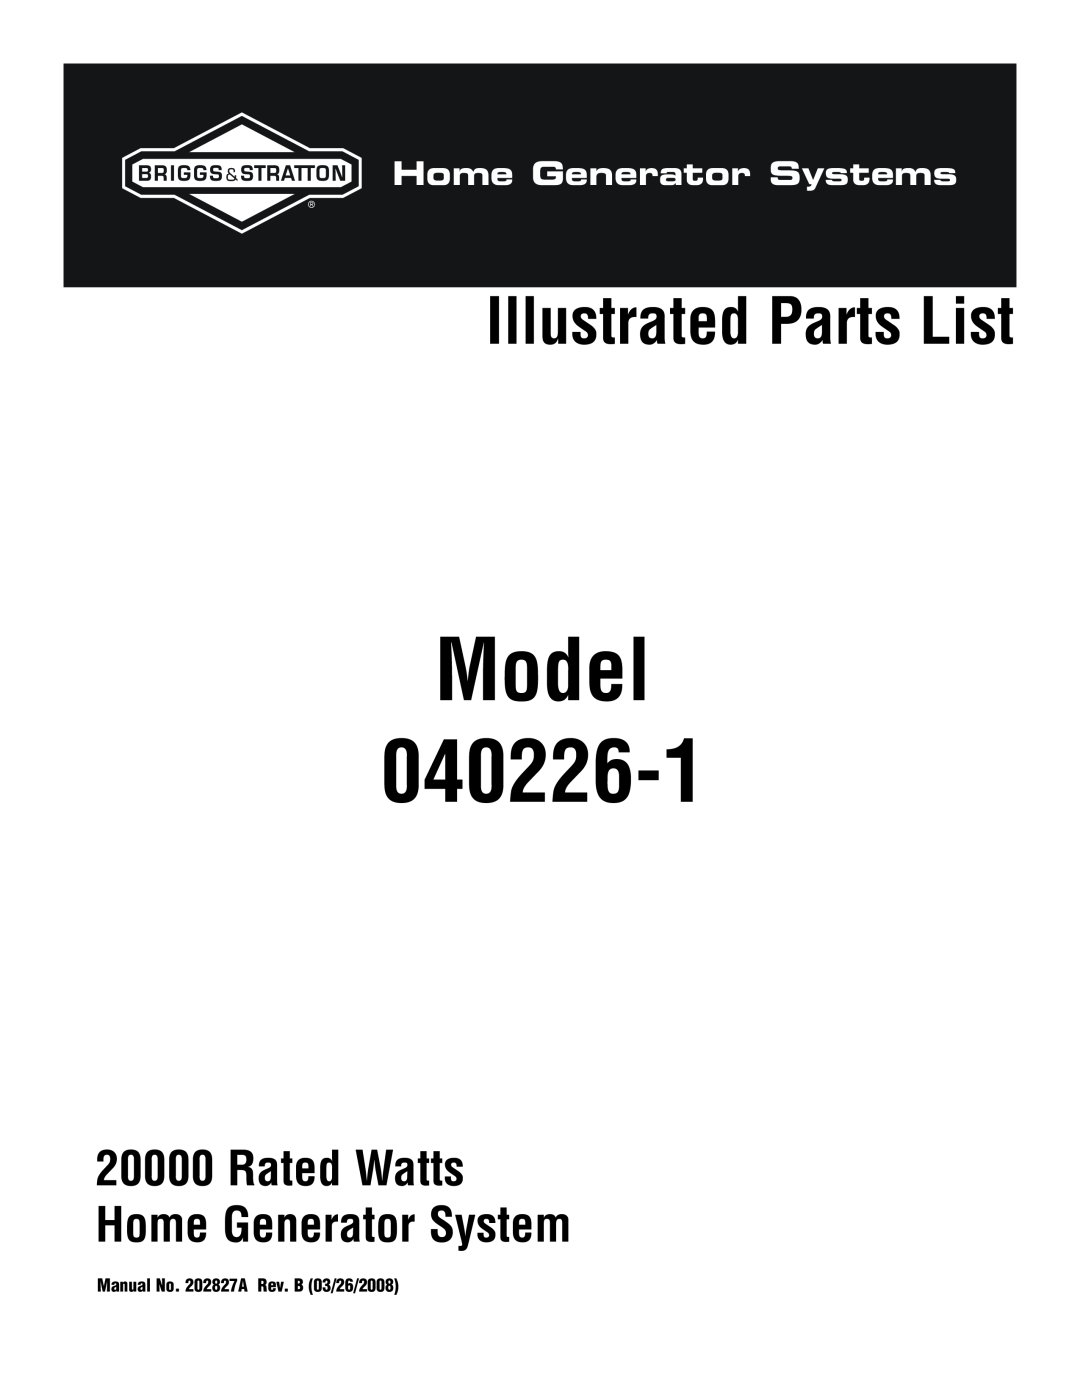 Briggs & Stratton 040226-1 manual Model, Illustrated Parts List, Rated Watts Home Generator System, Home Generator Systems 